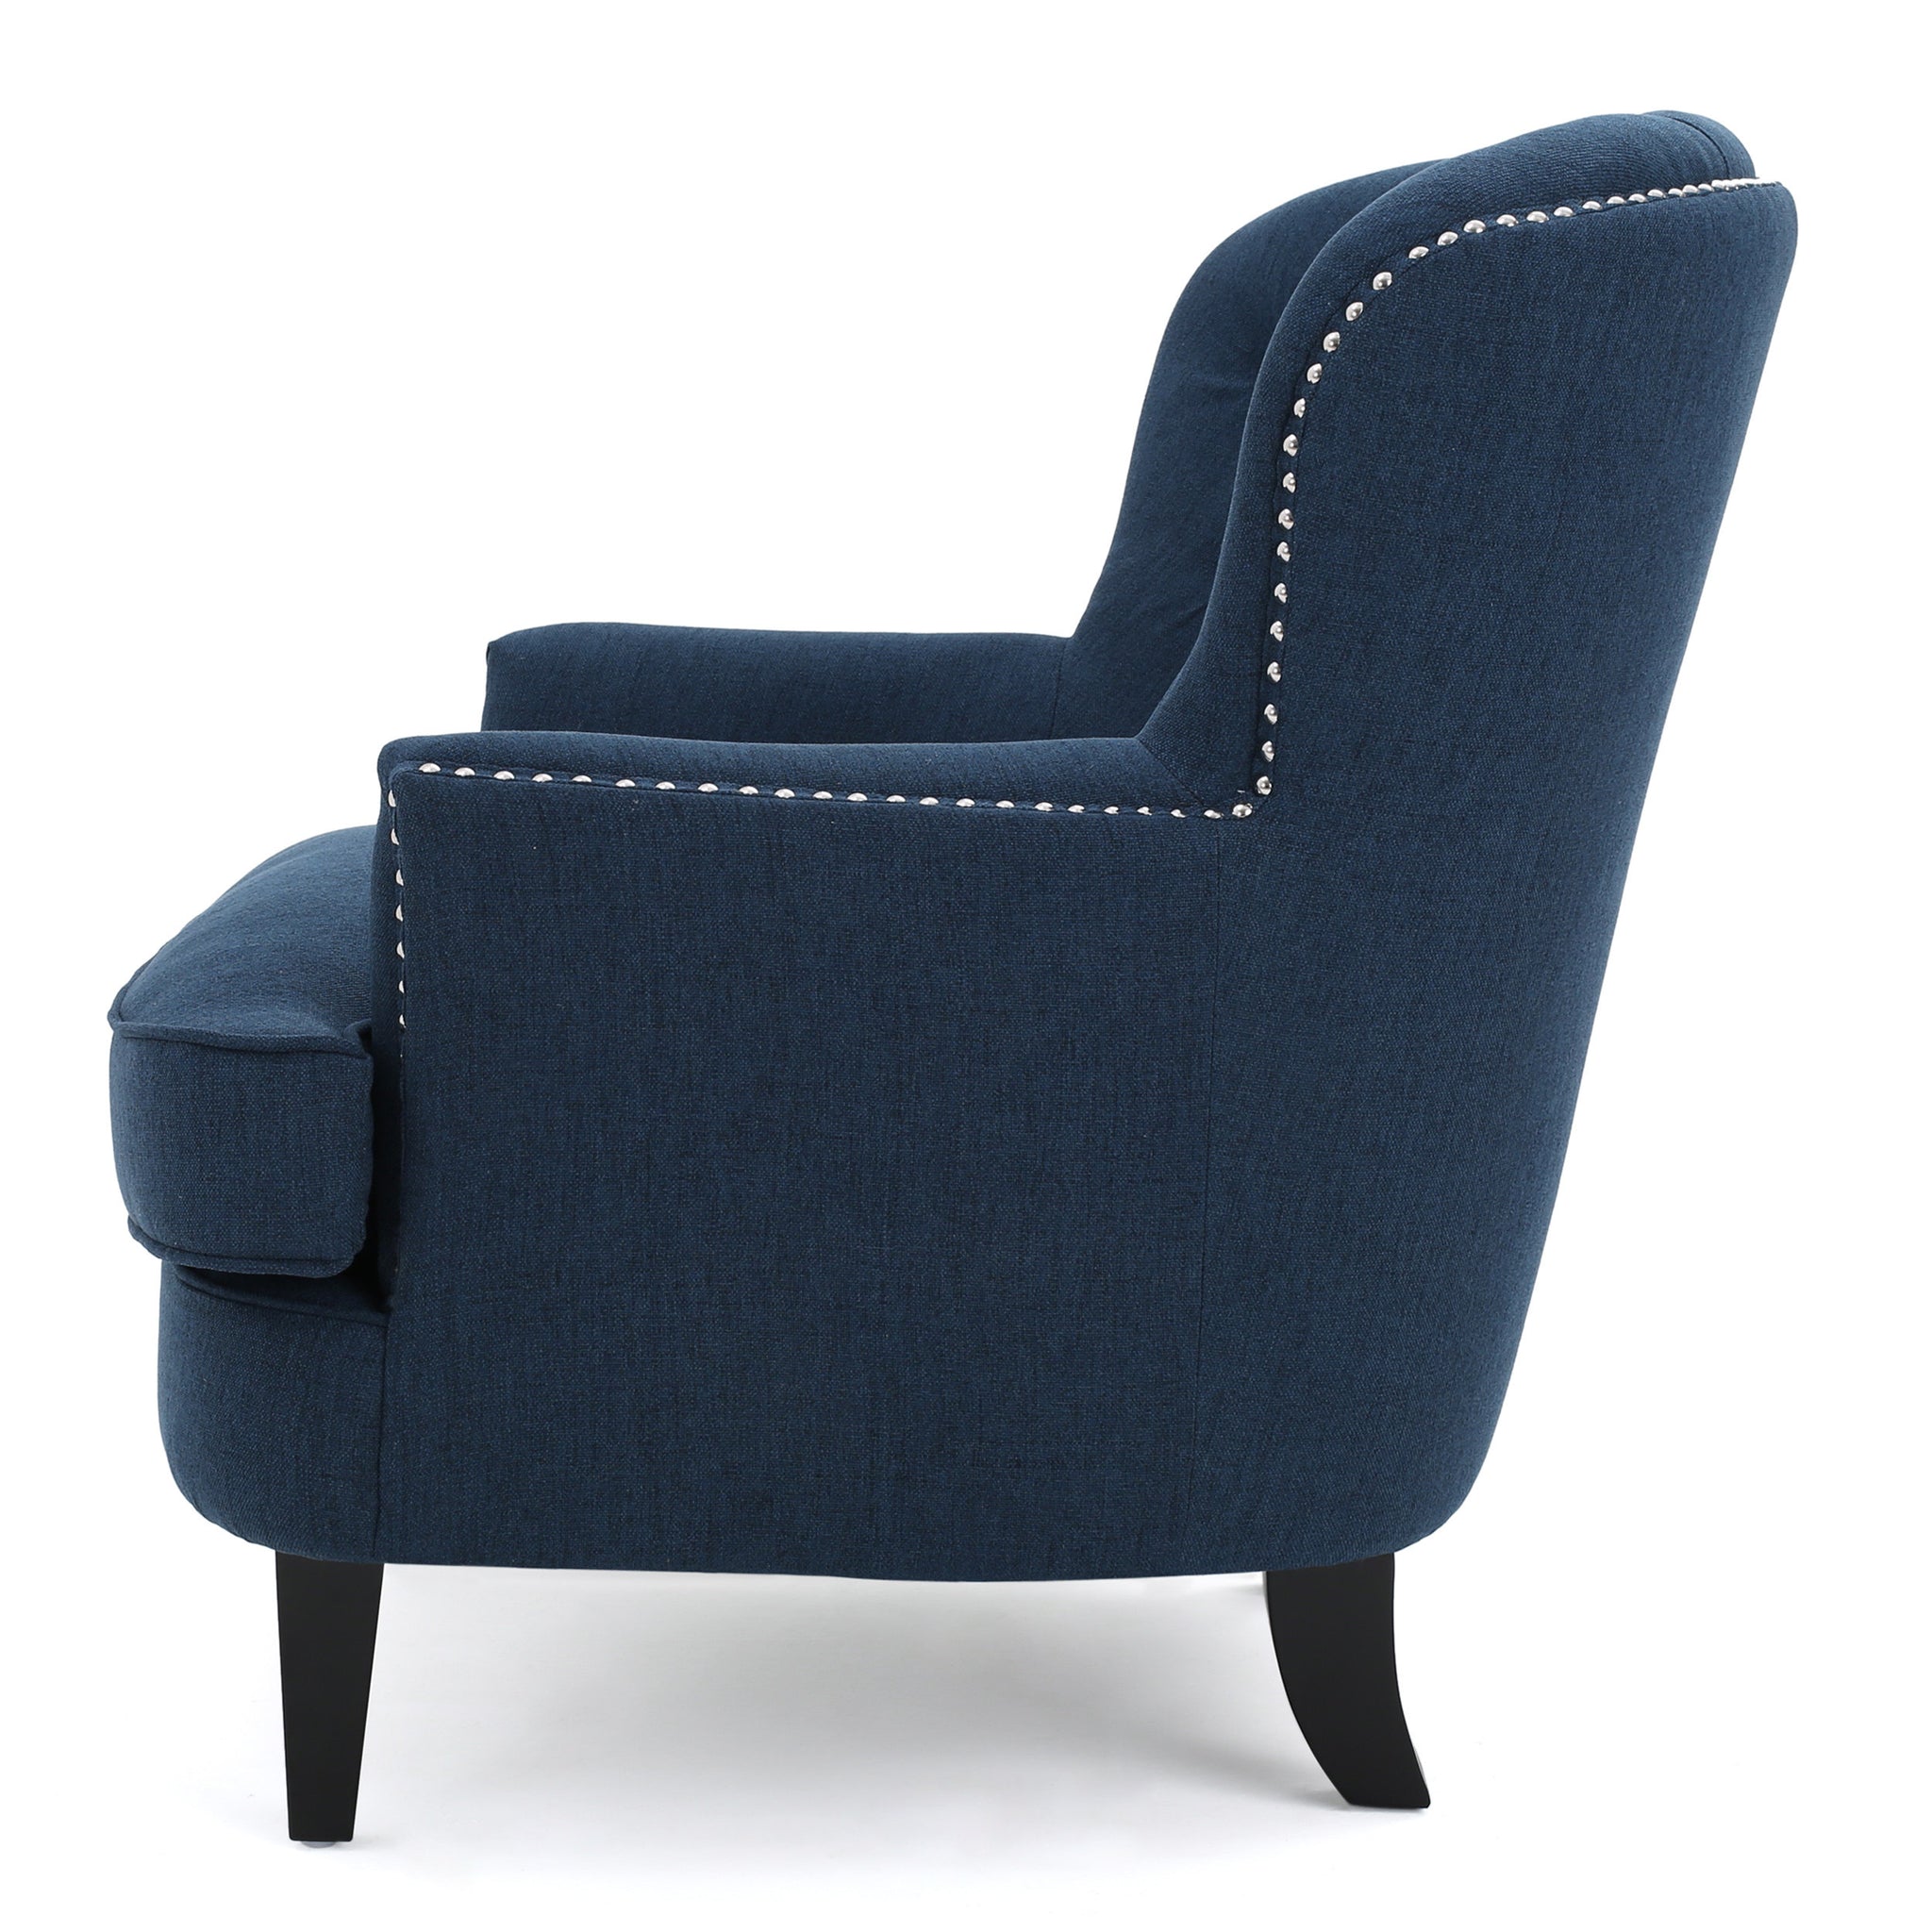 Alfred Button Tufted Fabric Club Chair in Dark Blue Color